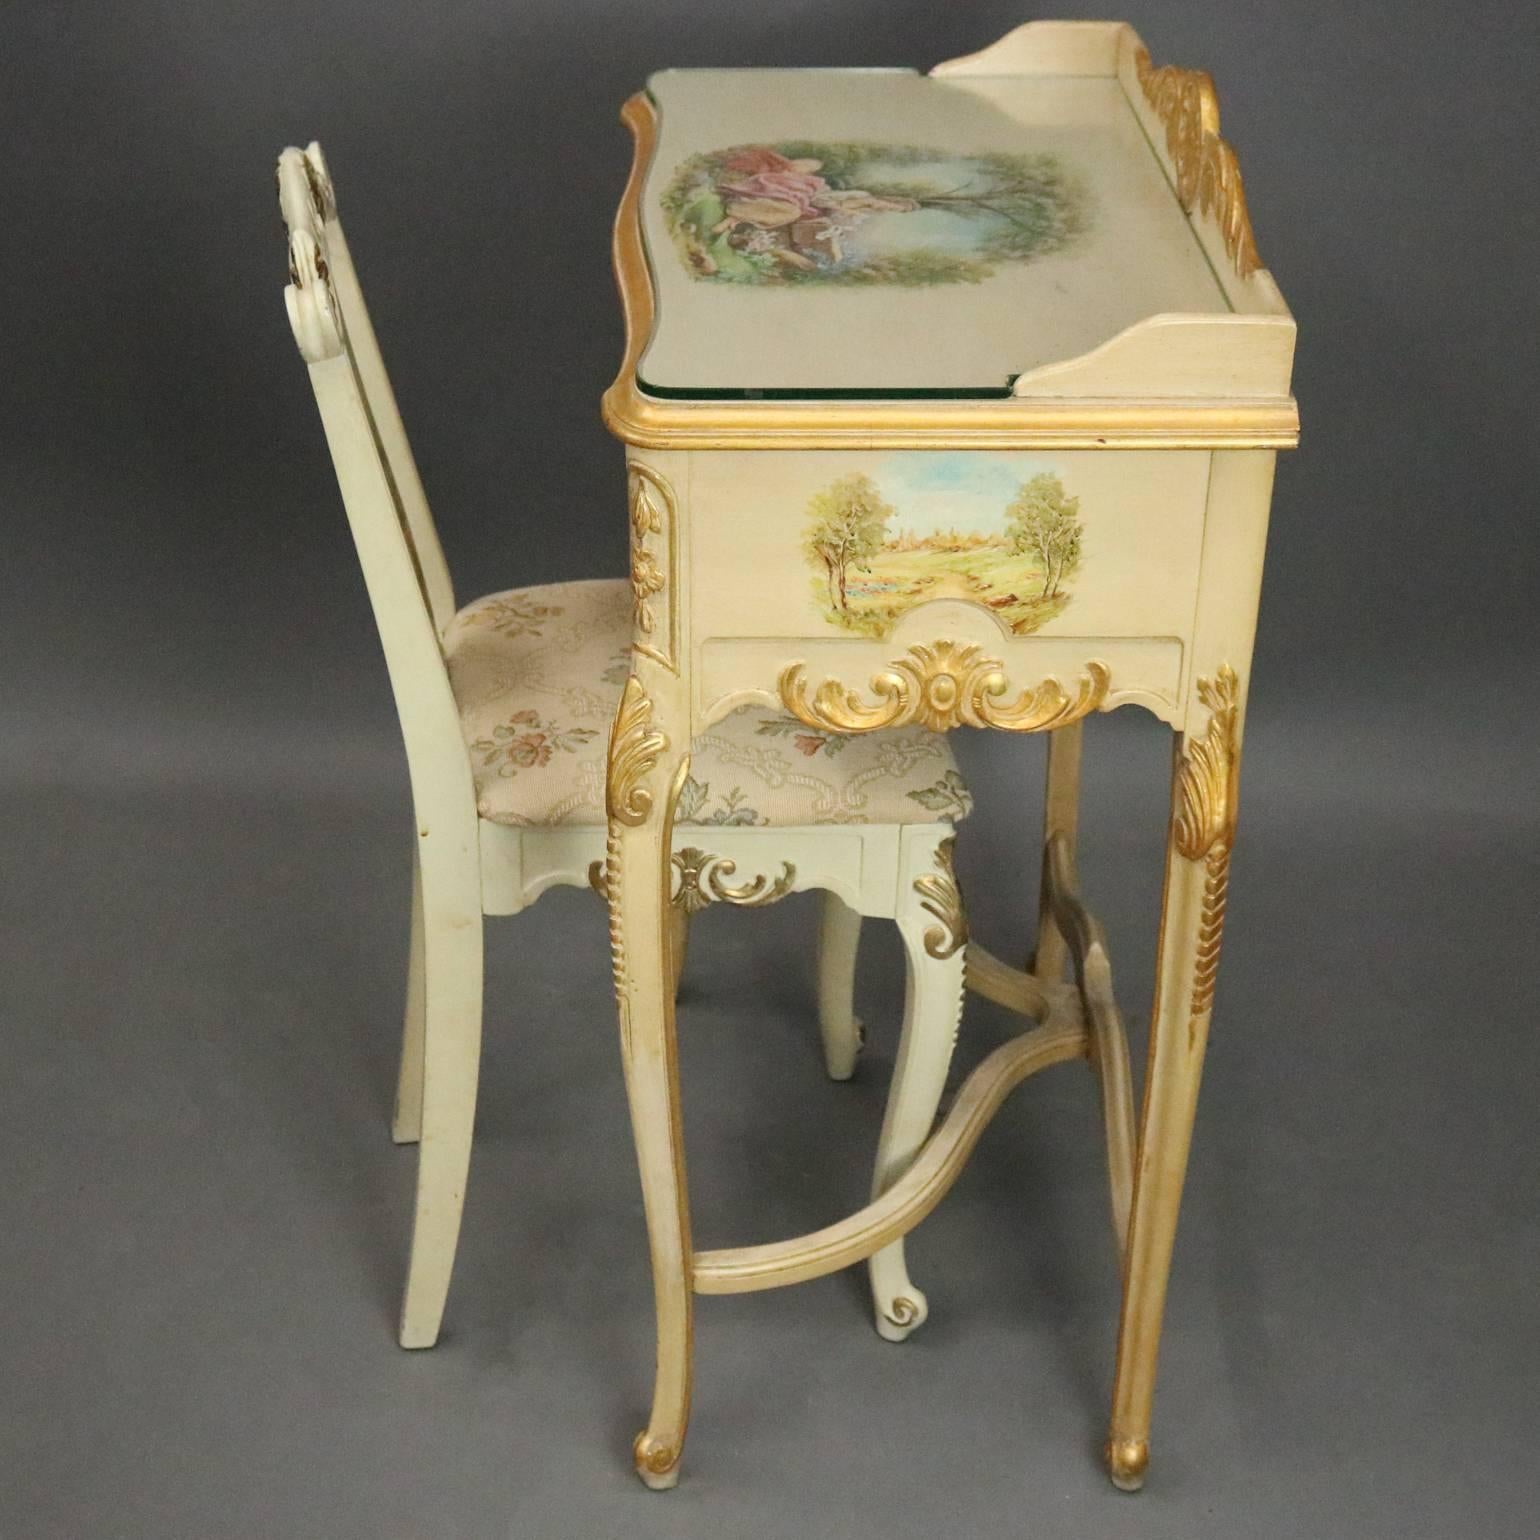 19th Century Antique French Provincial Vernis Martin Painted Lady's Desk and Chair, c1880